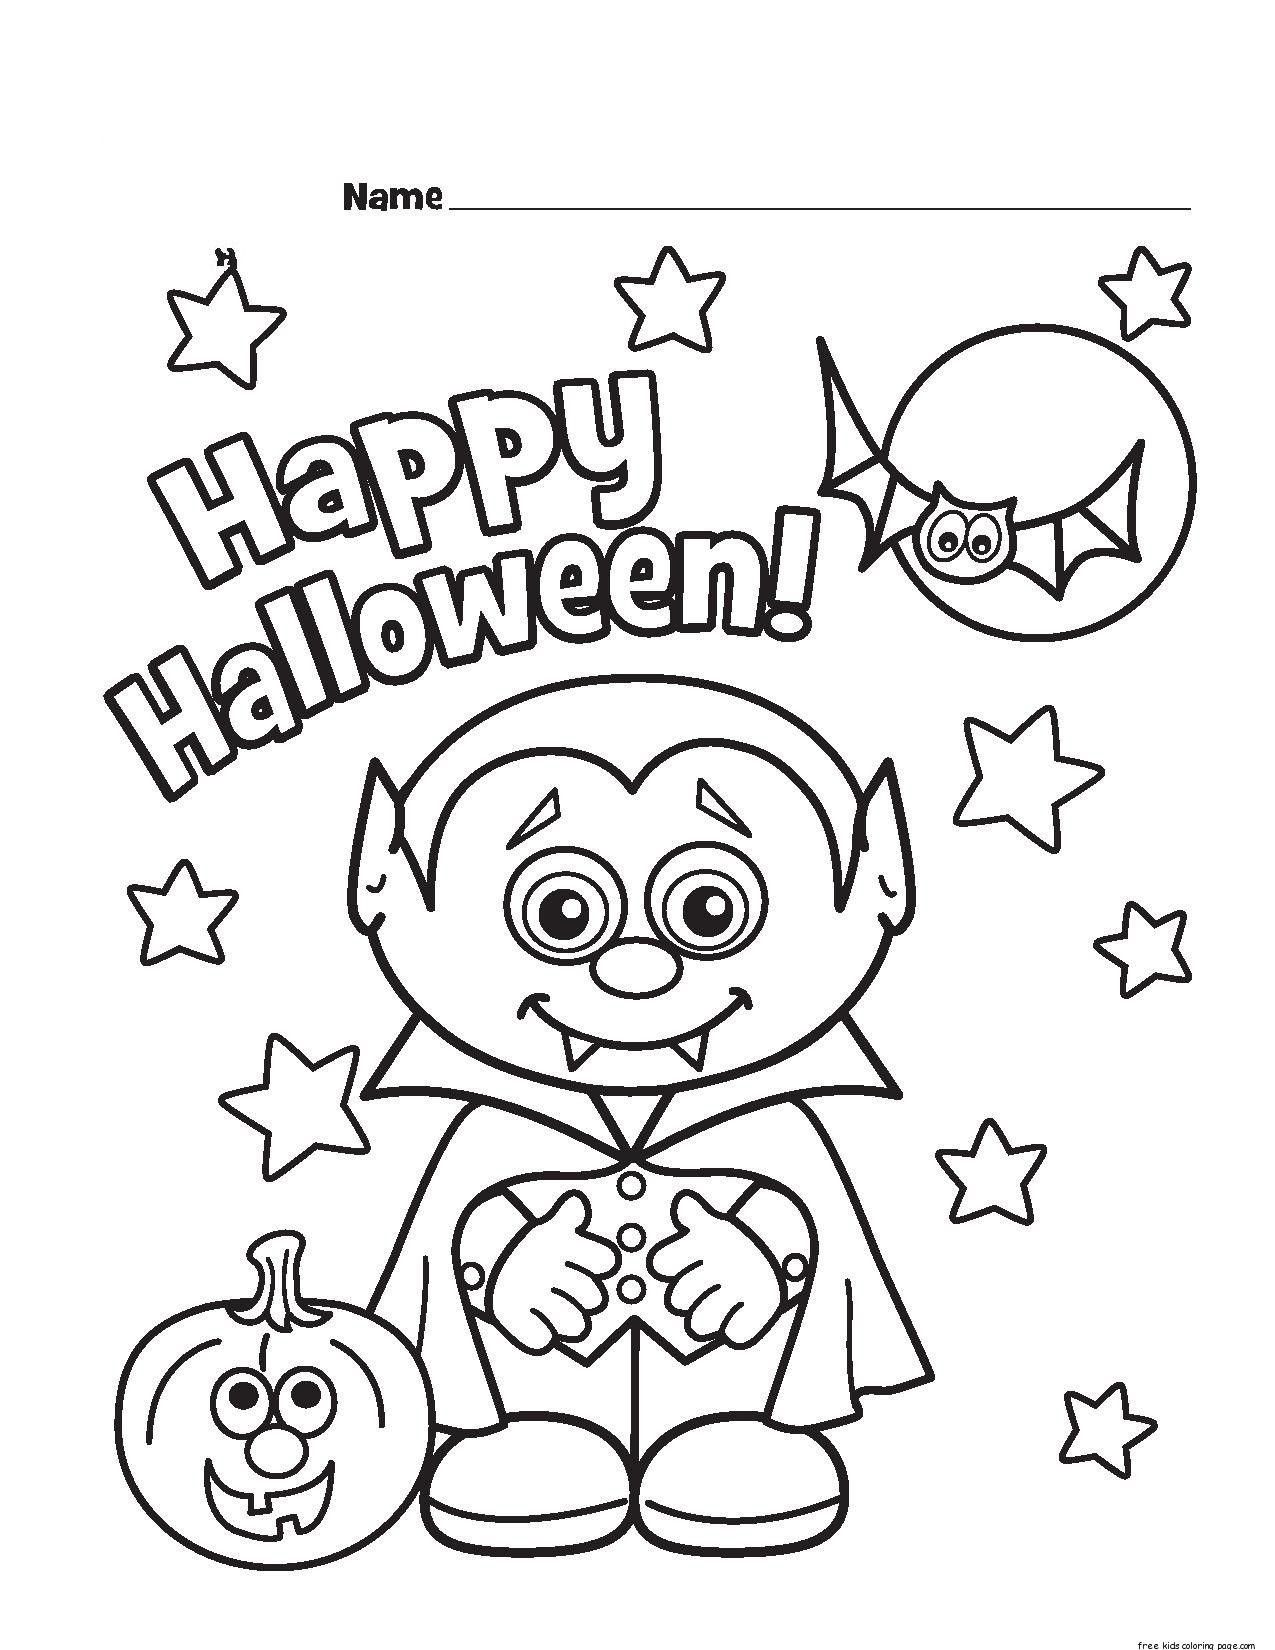 Halloween Little Vampire Printable coloring pages for